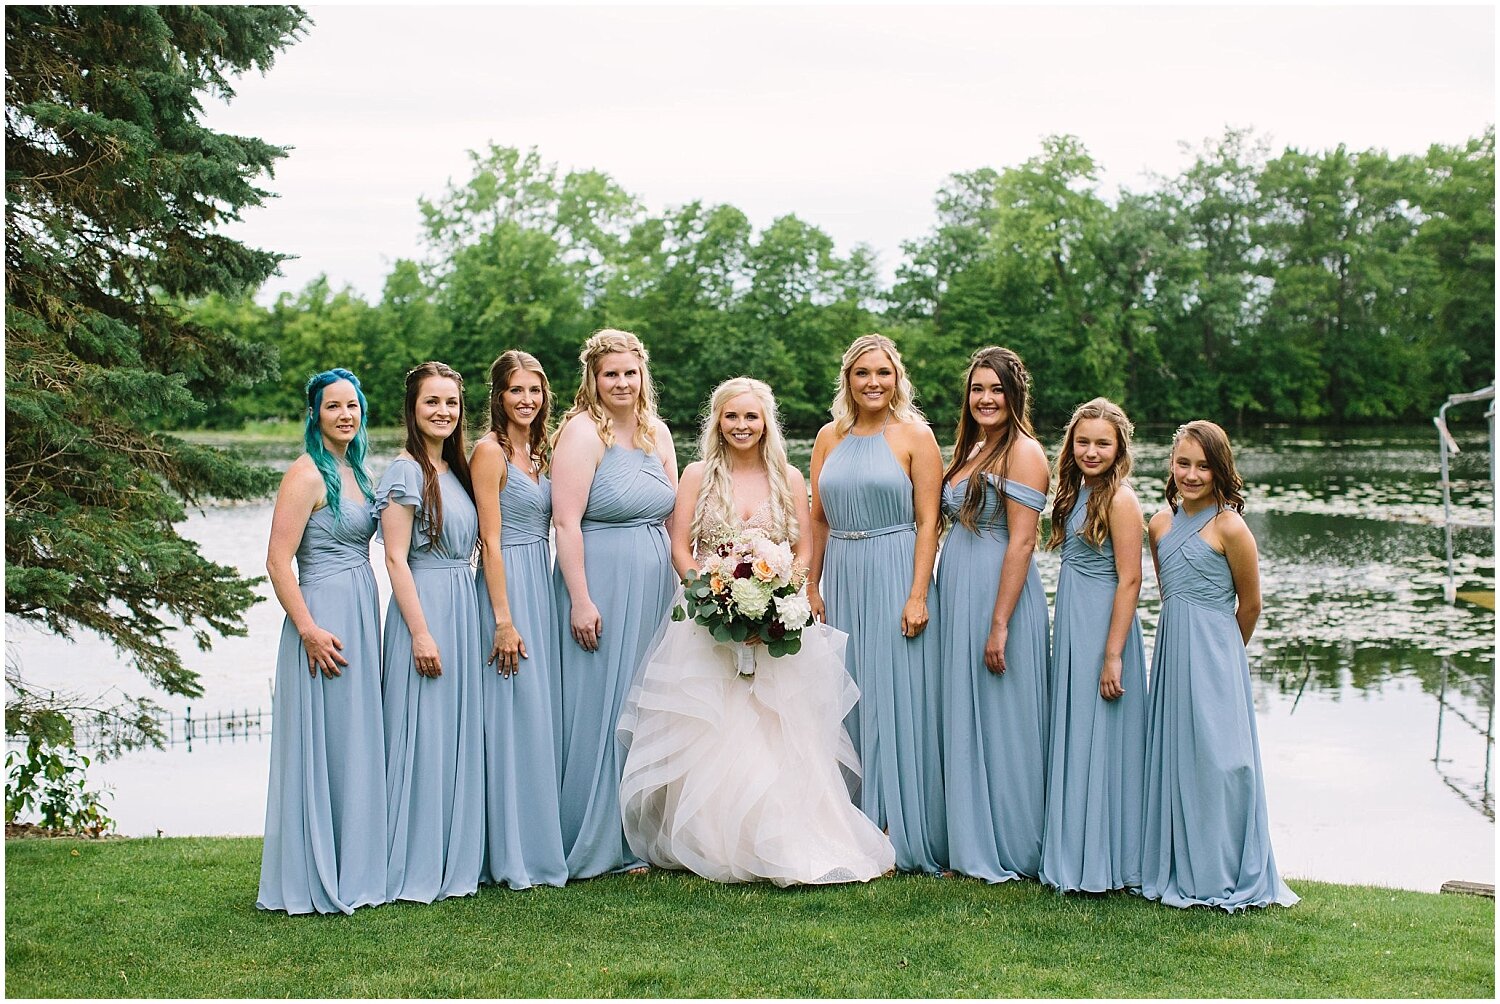  bride with her bridesmaids before the wedding ceremony 